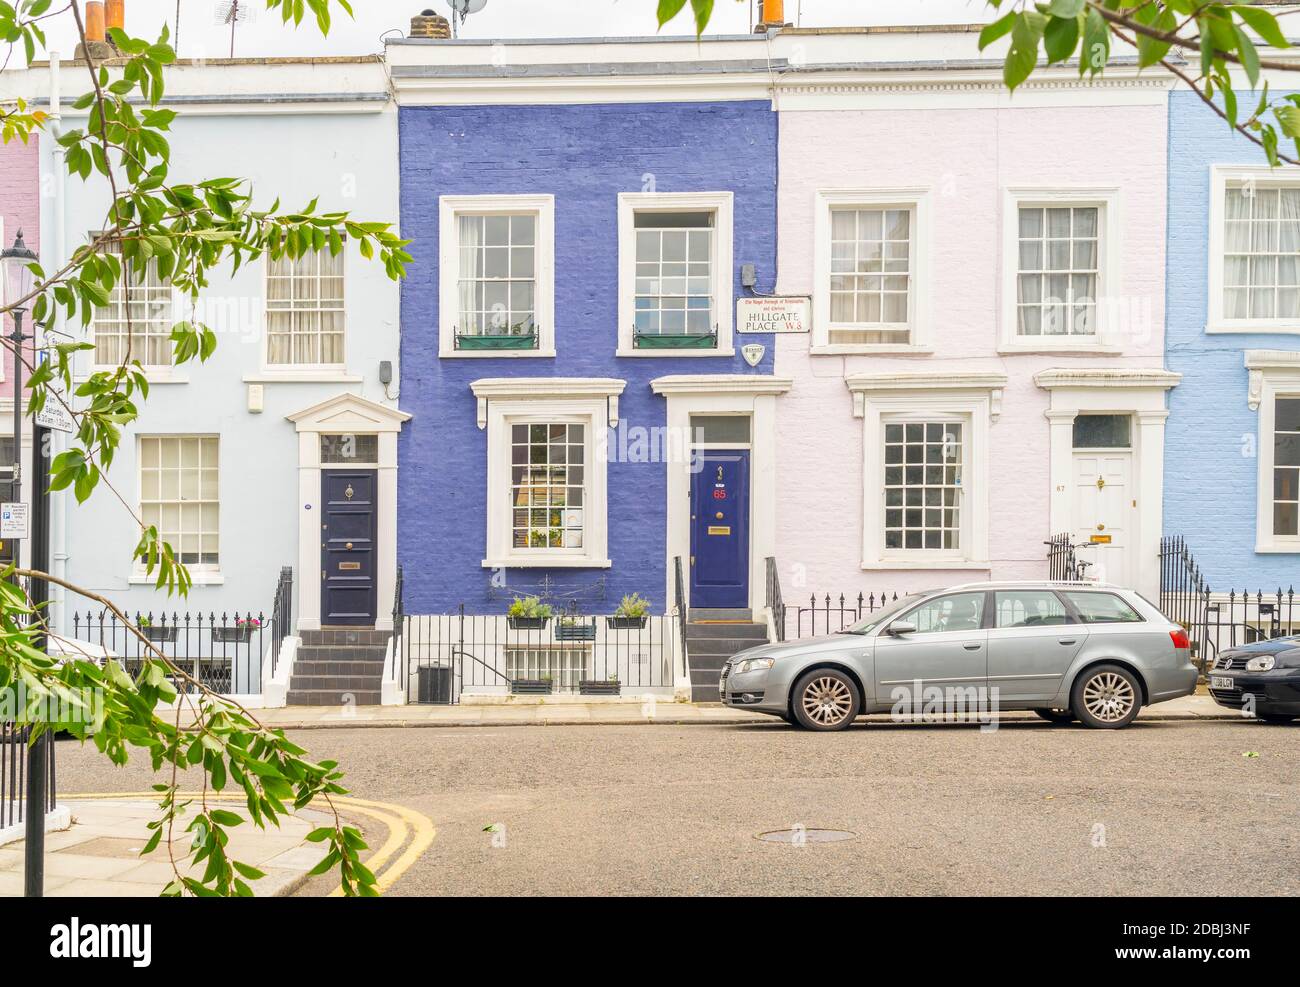 Colourful buildings in Notting Hill, London, England, United Kingdom, Europe Stock Photo